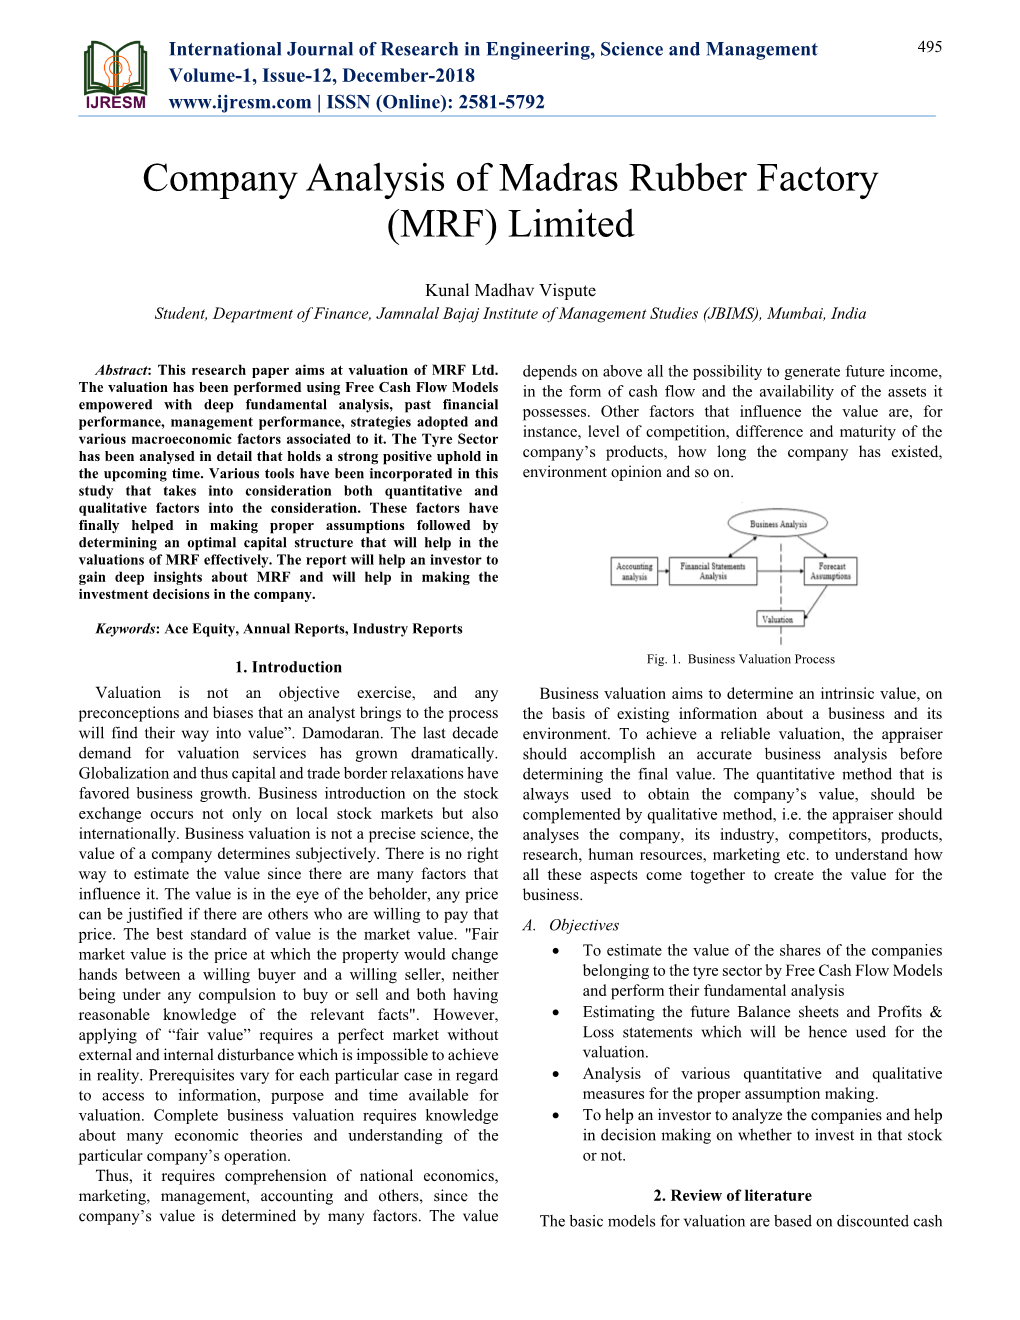 Company Analysis of Madras Rubber Factory (MRF) Limited